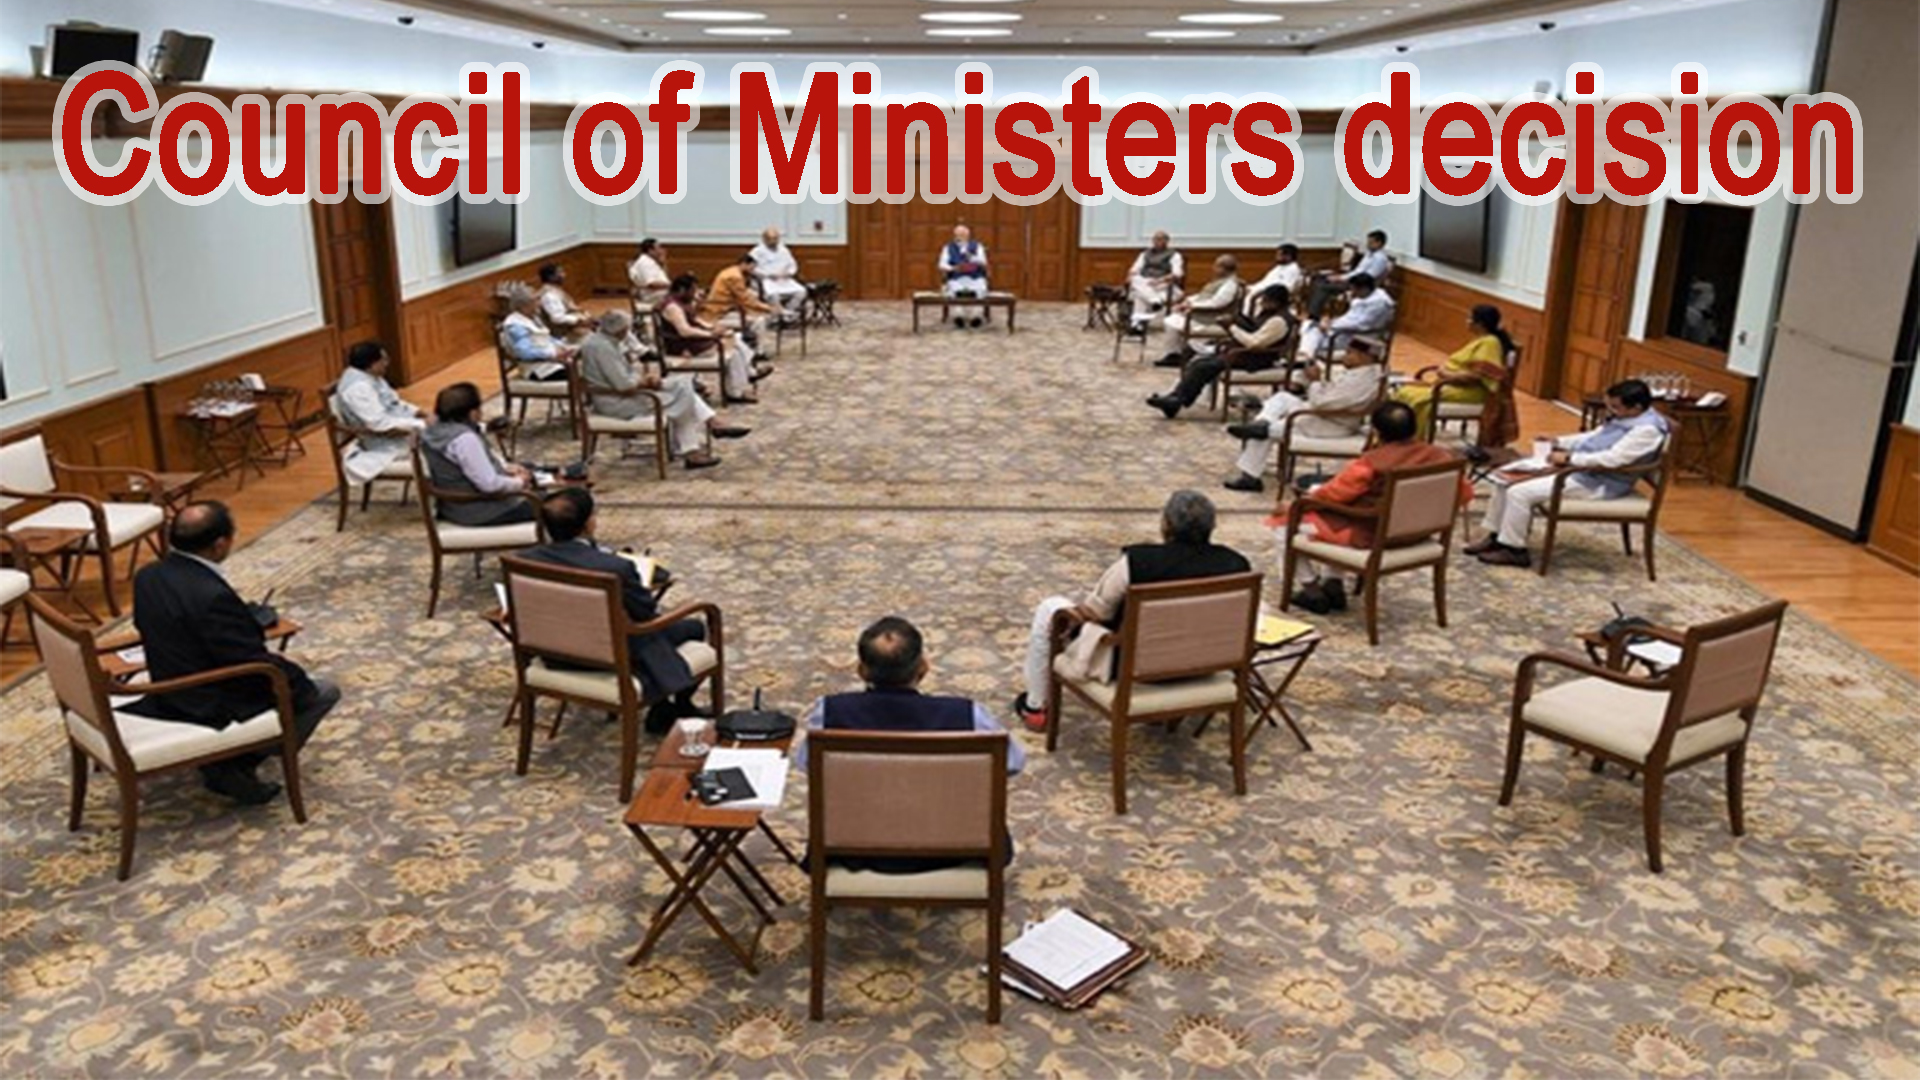 Council of Ministers decision